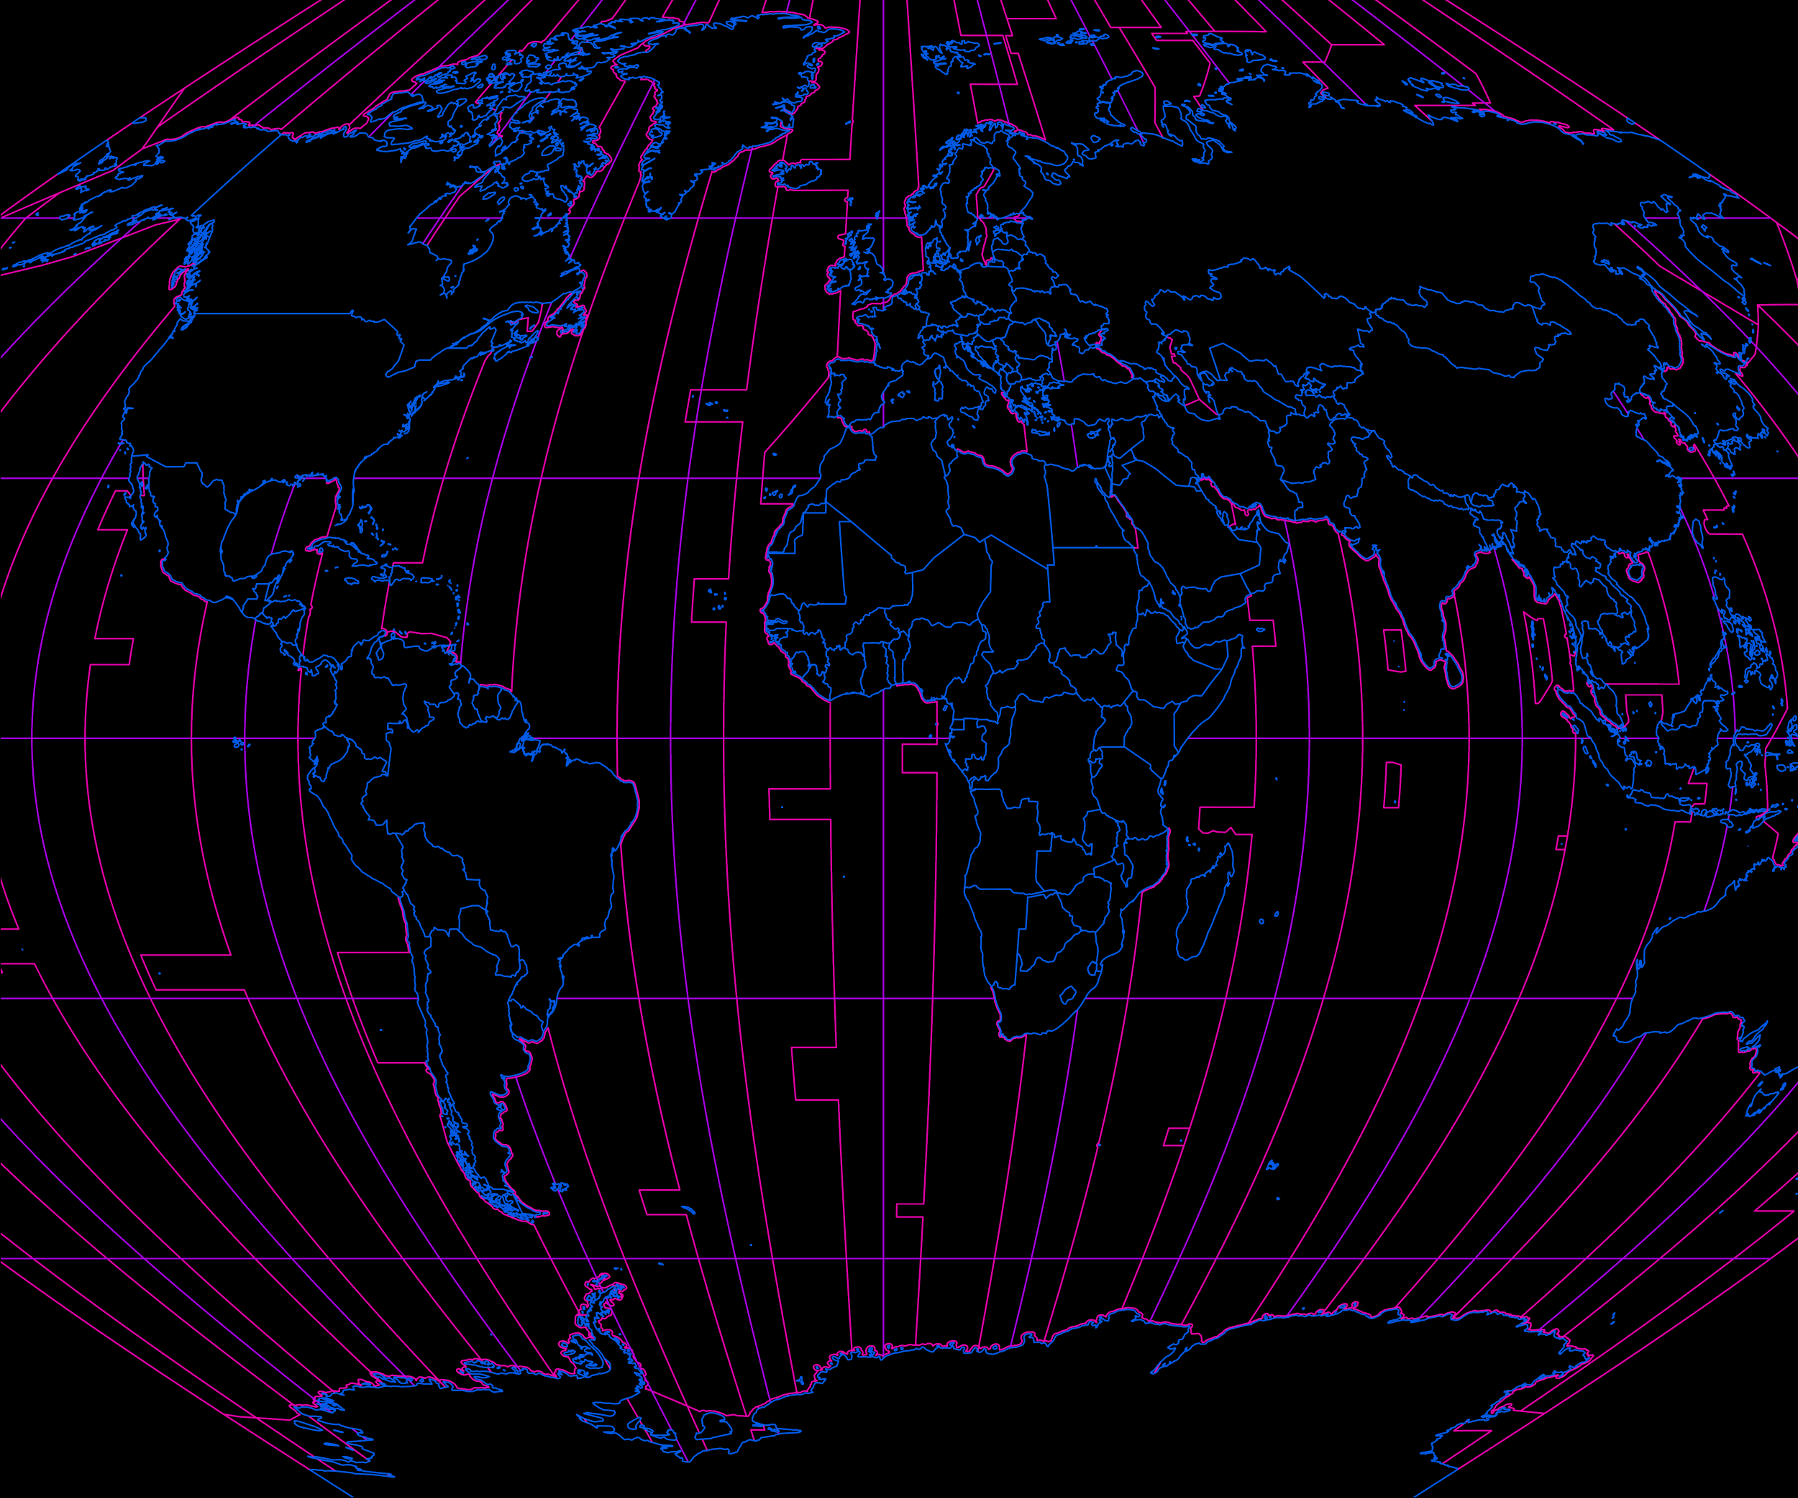 Fun with Map Projections